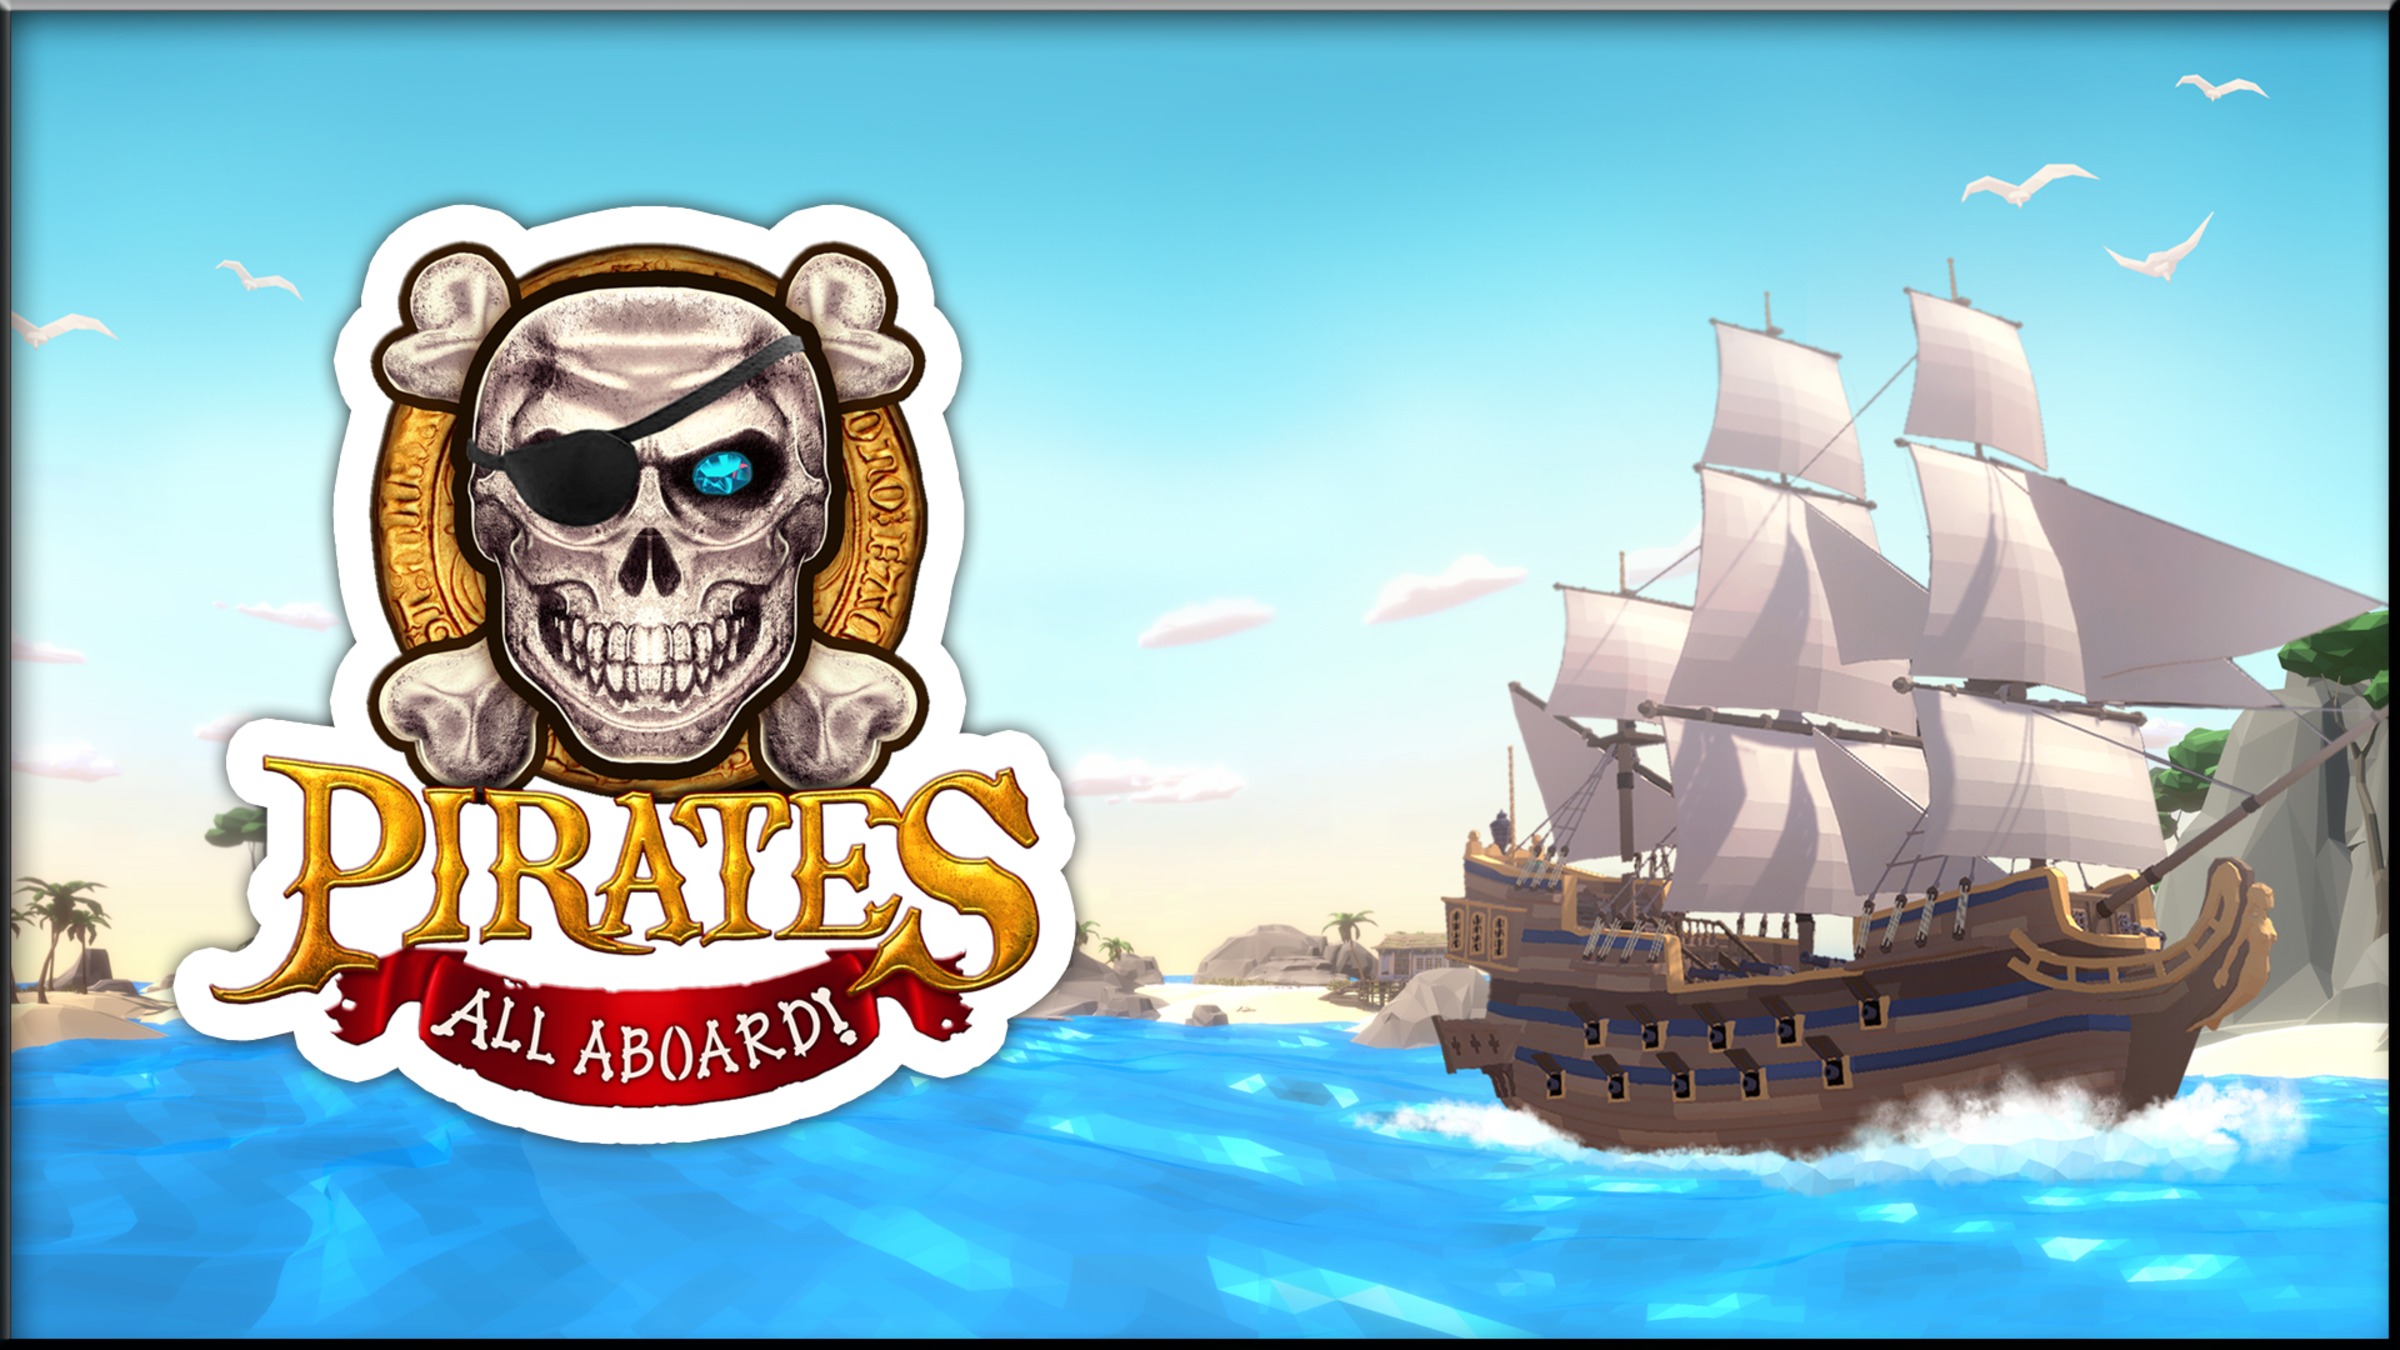 Pirates: Aboard! Nintendo Switch - Nintendo Official Site